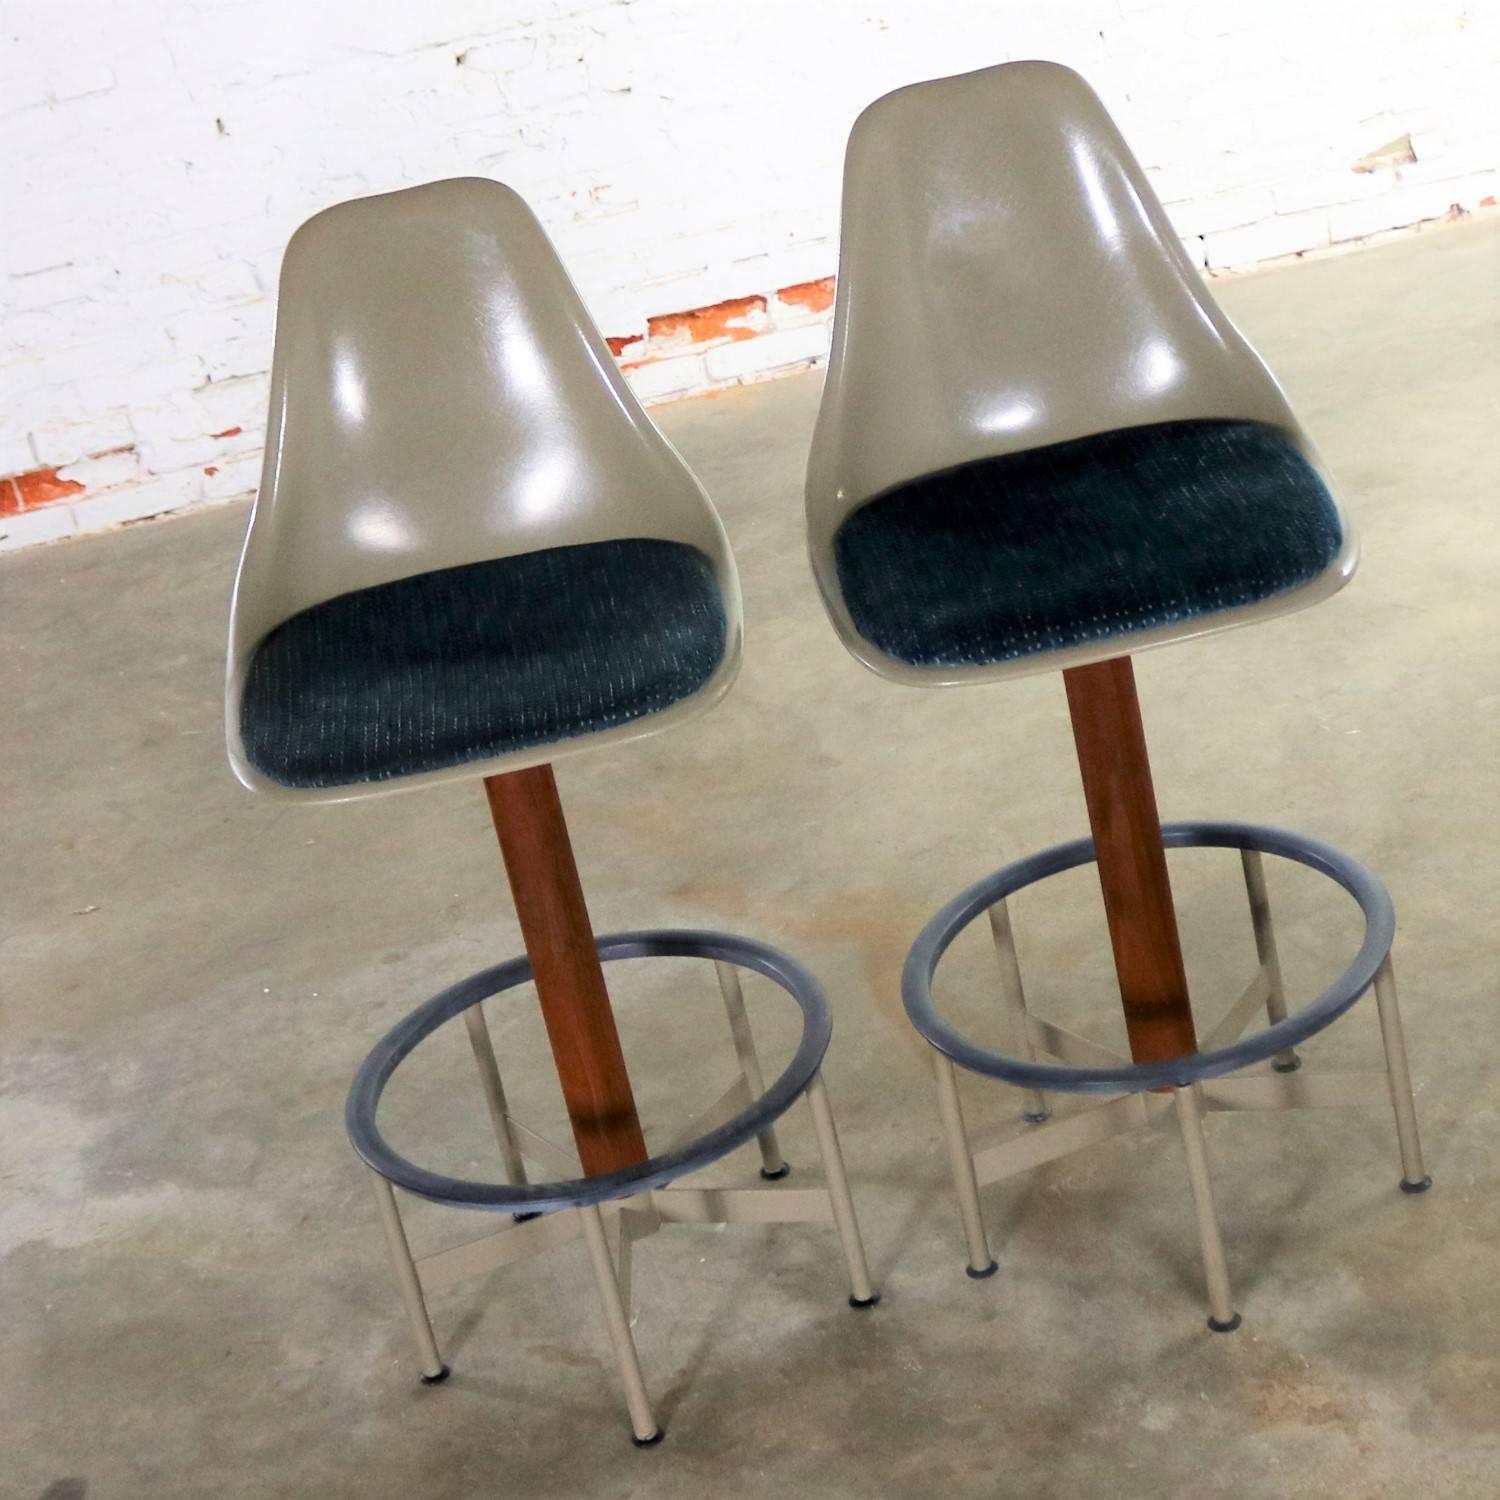 Handsome and iconic pair of Mid-Century Modern swivel bar stools with footrest and upholstered seat pad by Burke, Inc. This pair is in wonderful vintage condition. They would be better served if the fabric were replaced; however, they are usable as